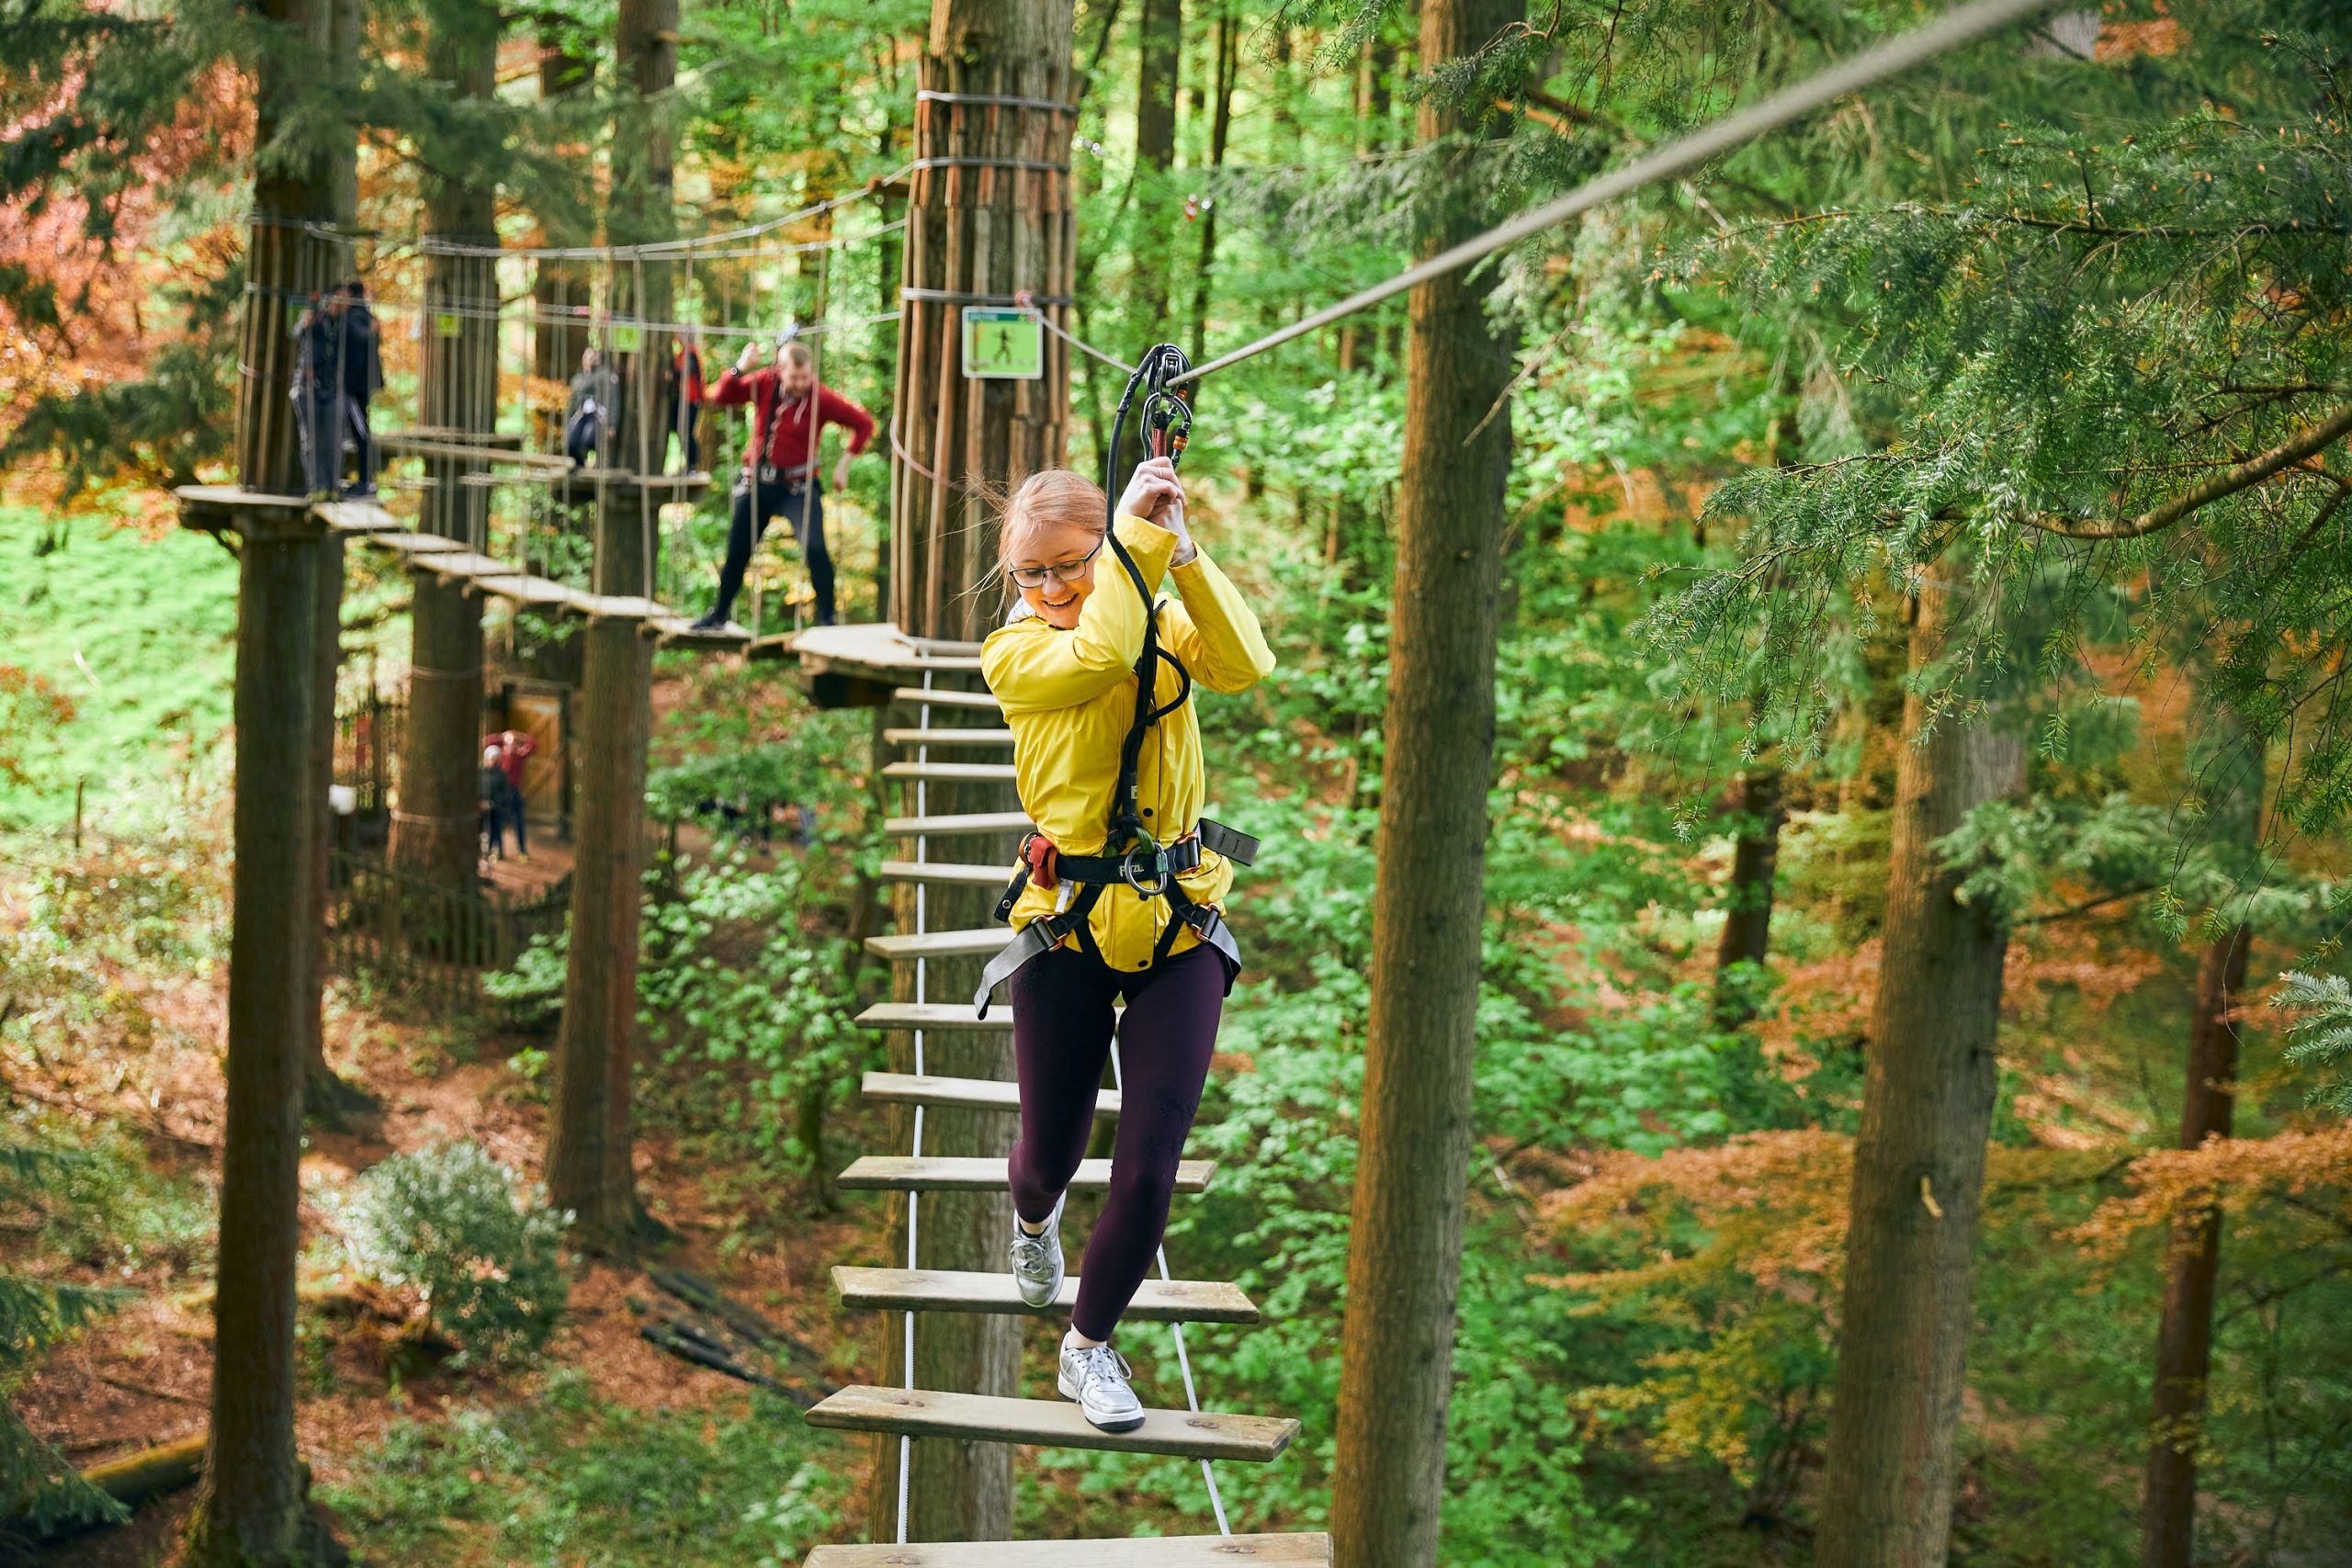 15% Off at Go Ape!